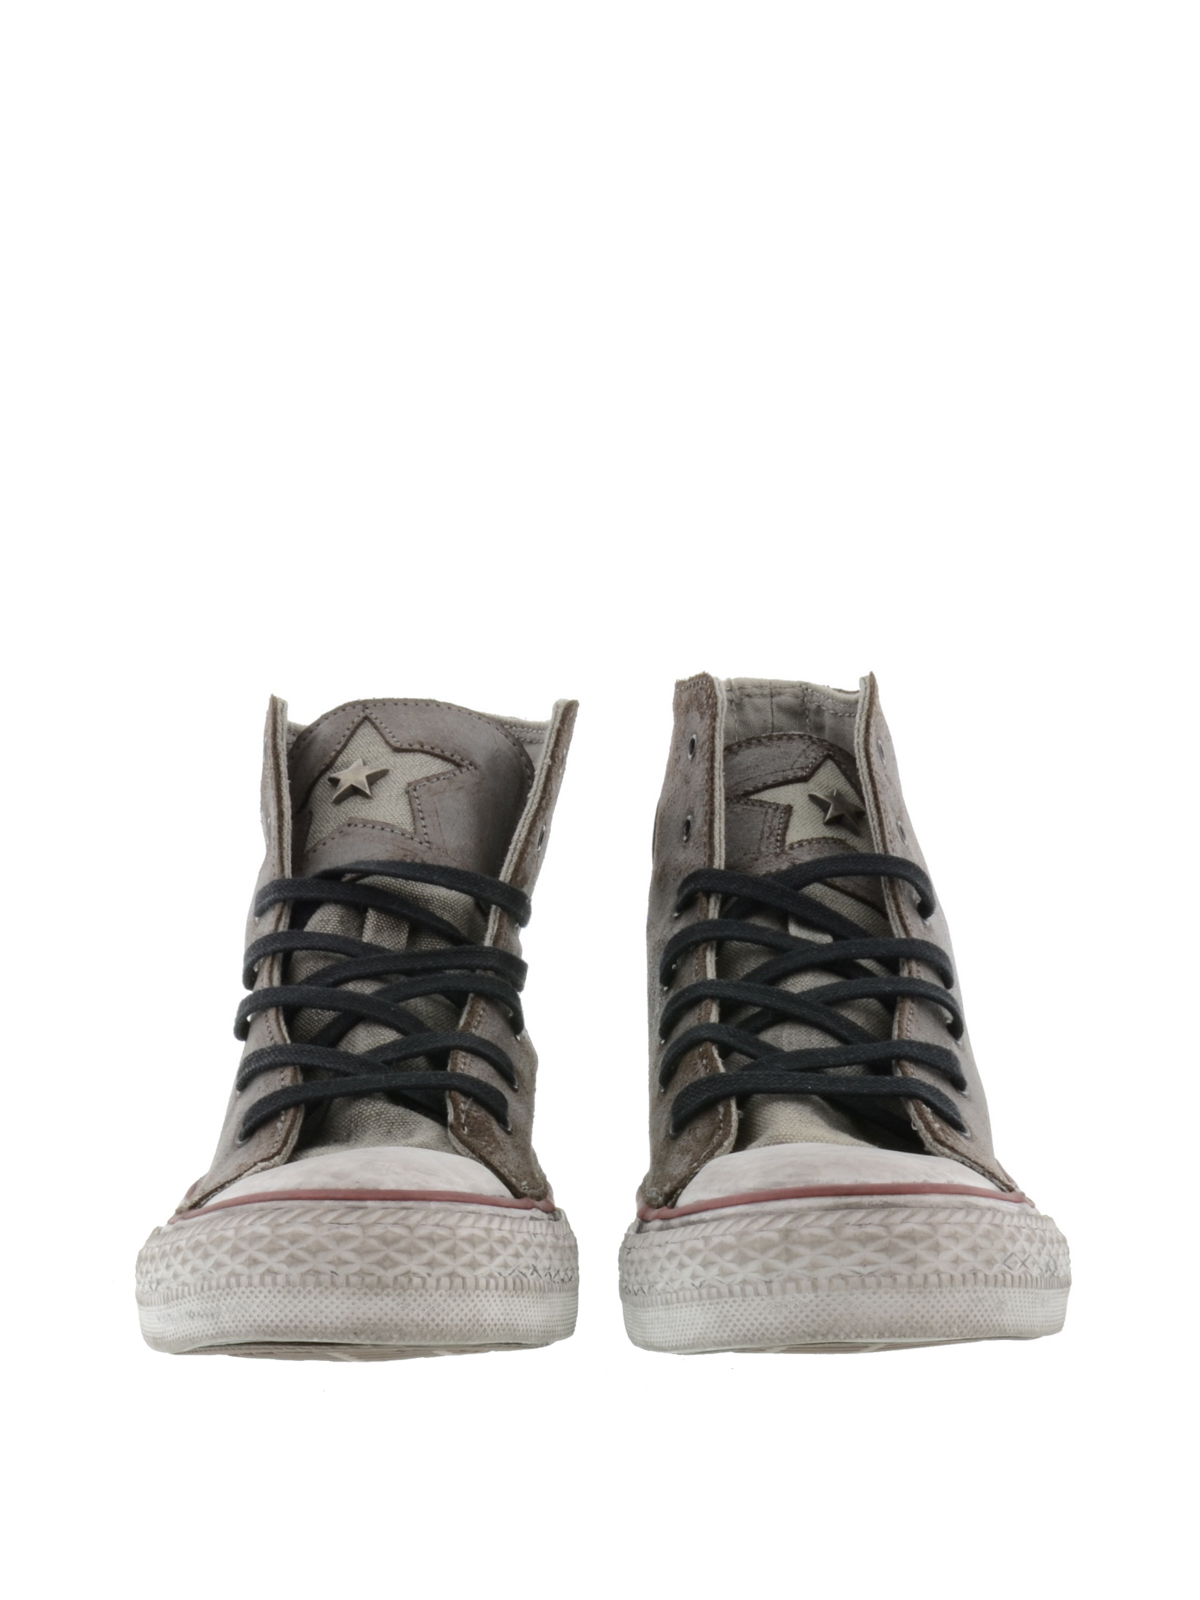 Converse Limited Edition - Premium iron star sneakers - trainers -  1C15FA06IRON